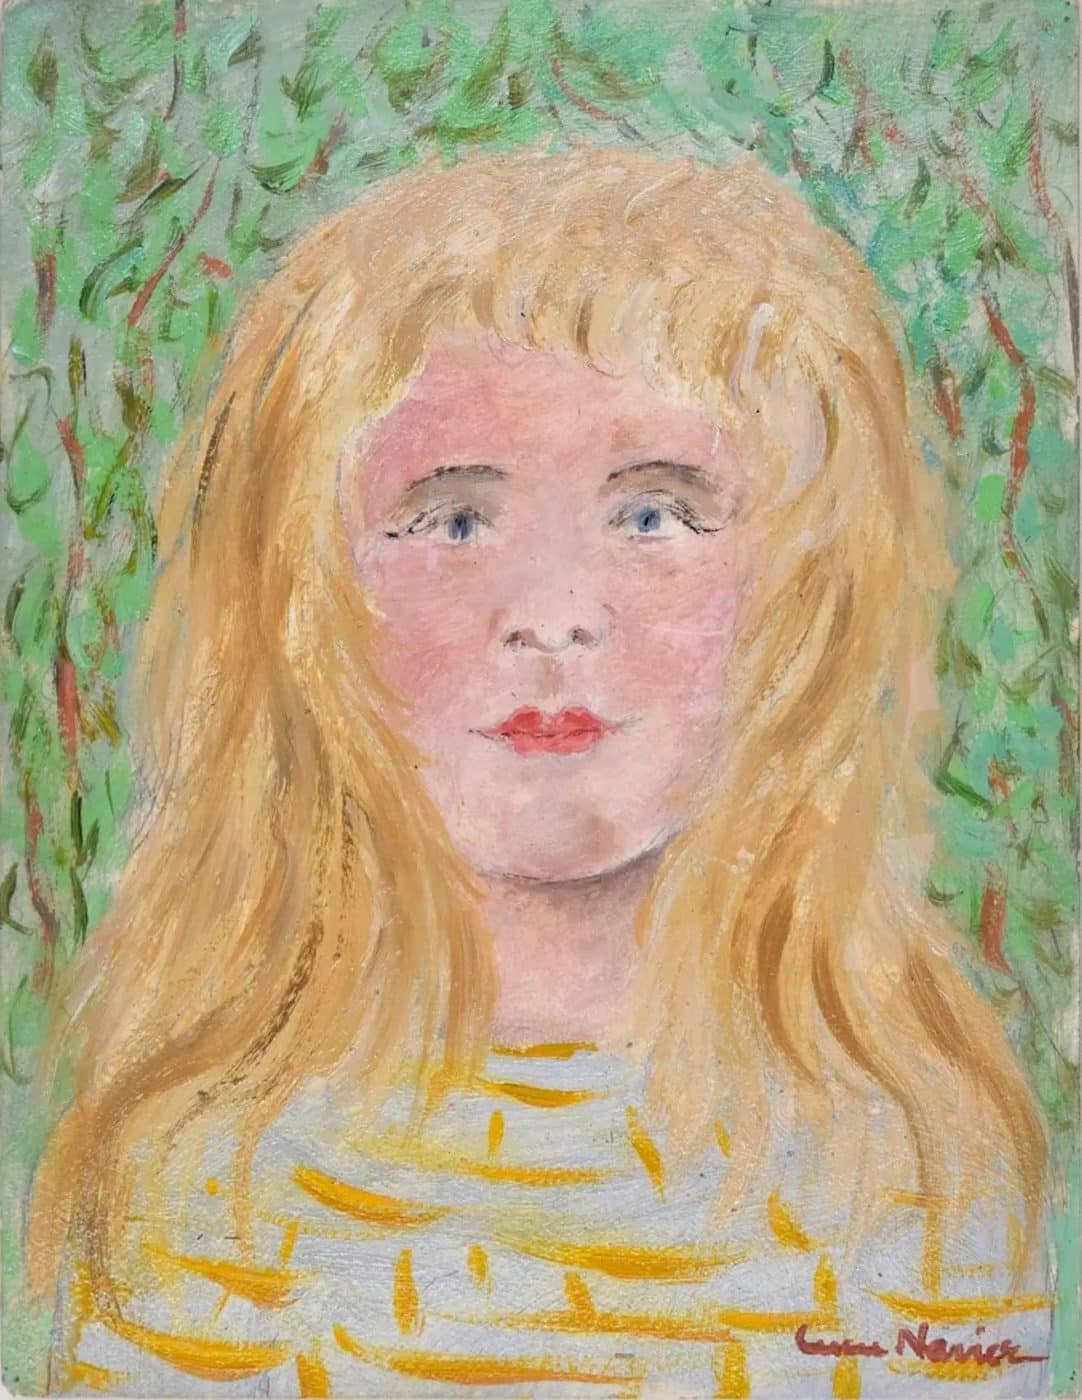 French artist LUCIE NAVIER's 1930s piece "YOUNG BLONDE GIRL"